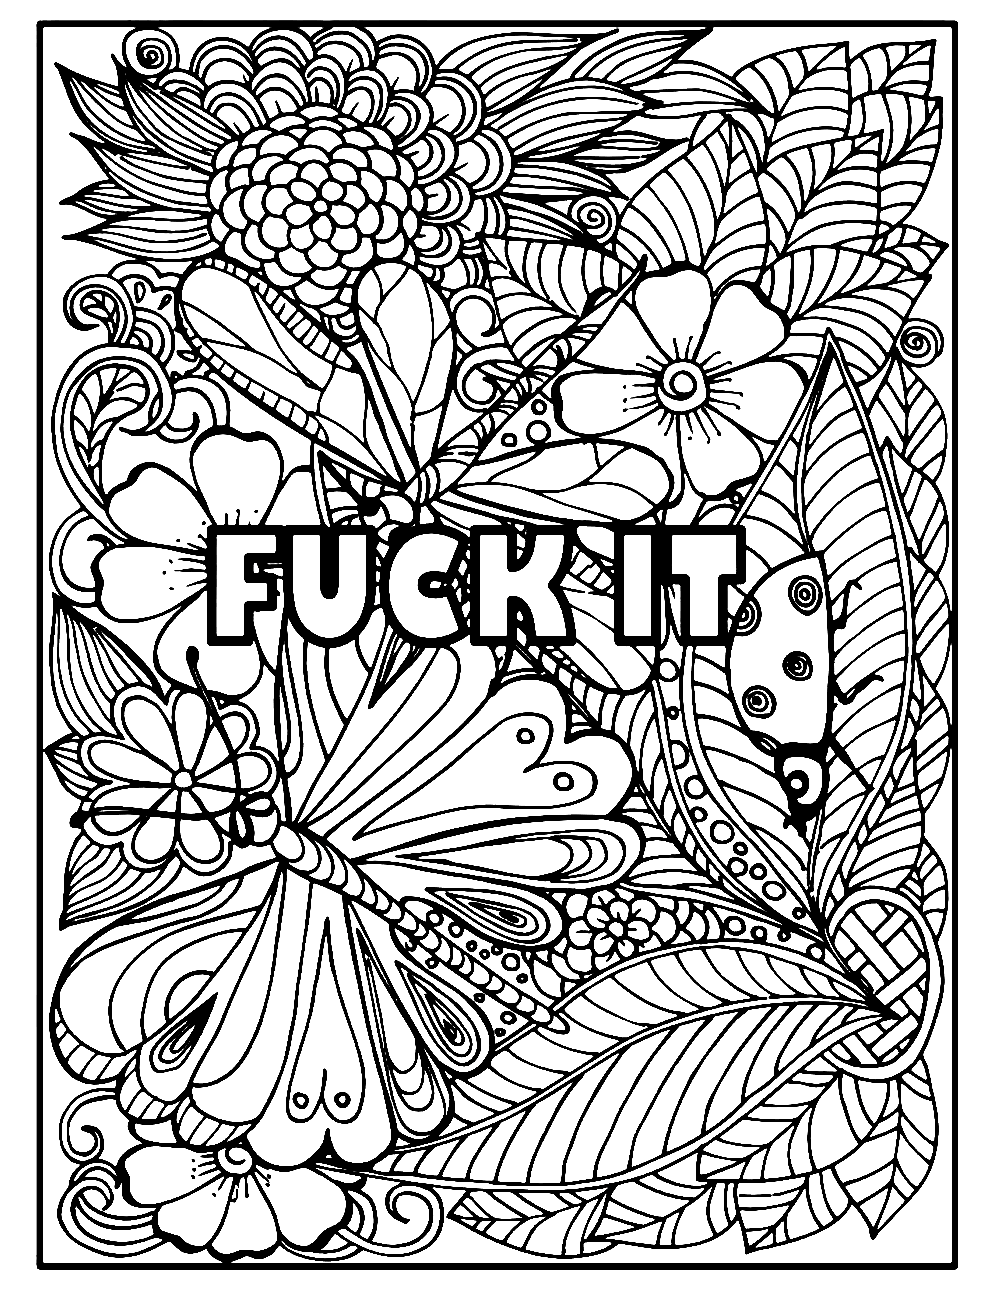 Printable Swear Word For Adults Coloring Page Free Printable Coloring